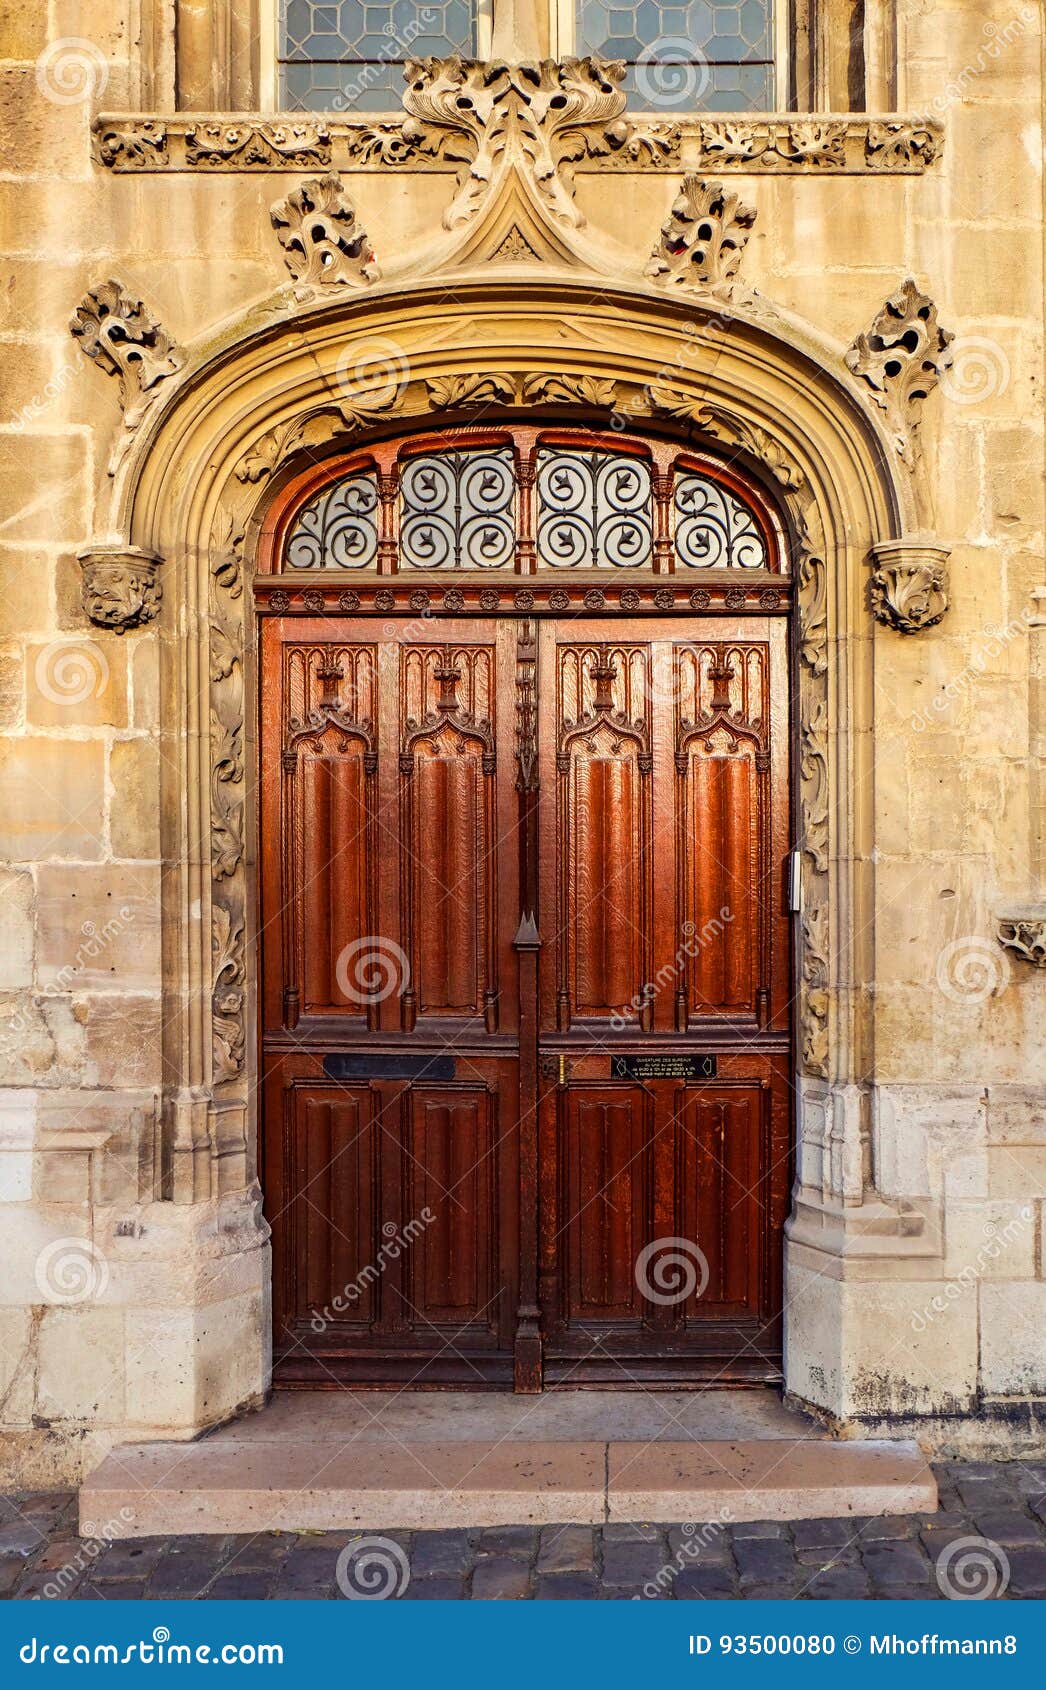 Ornate Wooden Double Door Entrance To An Old Church Stock Photo